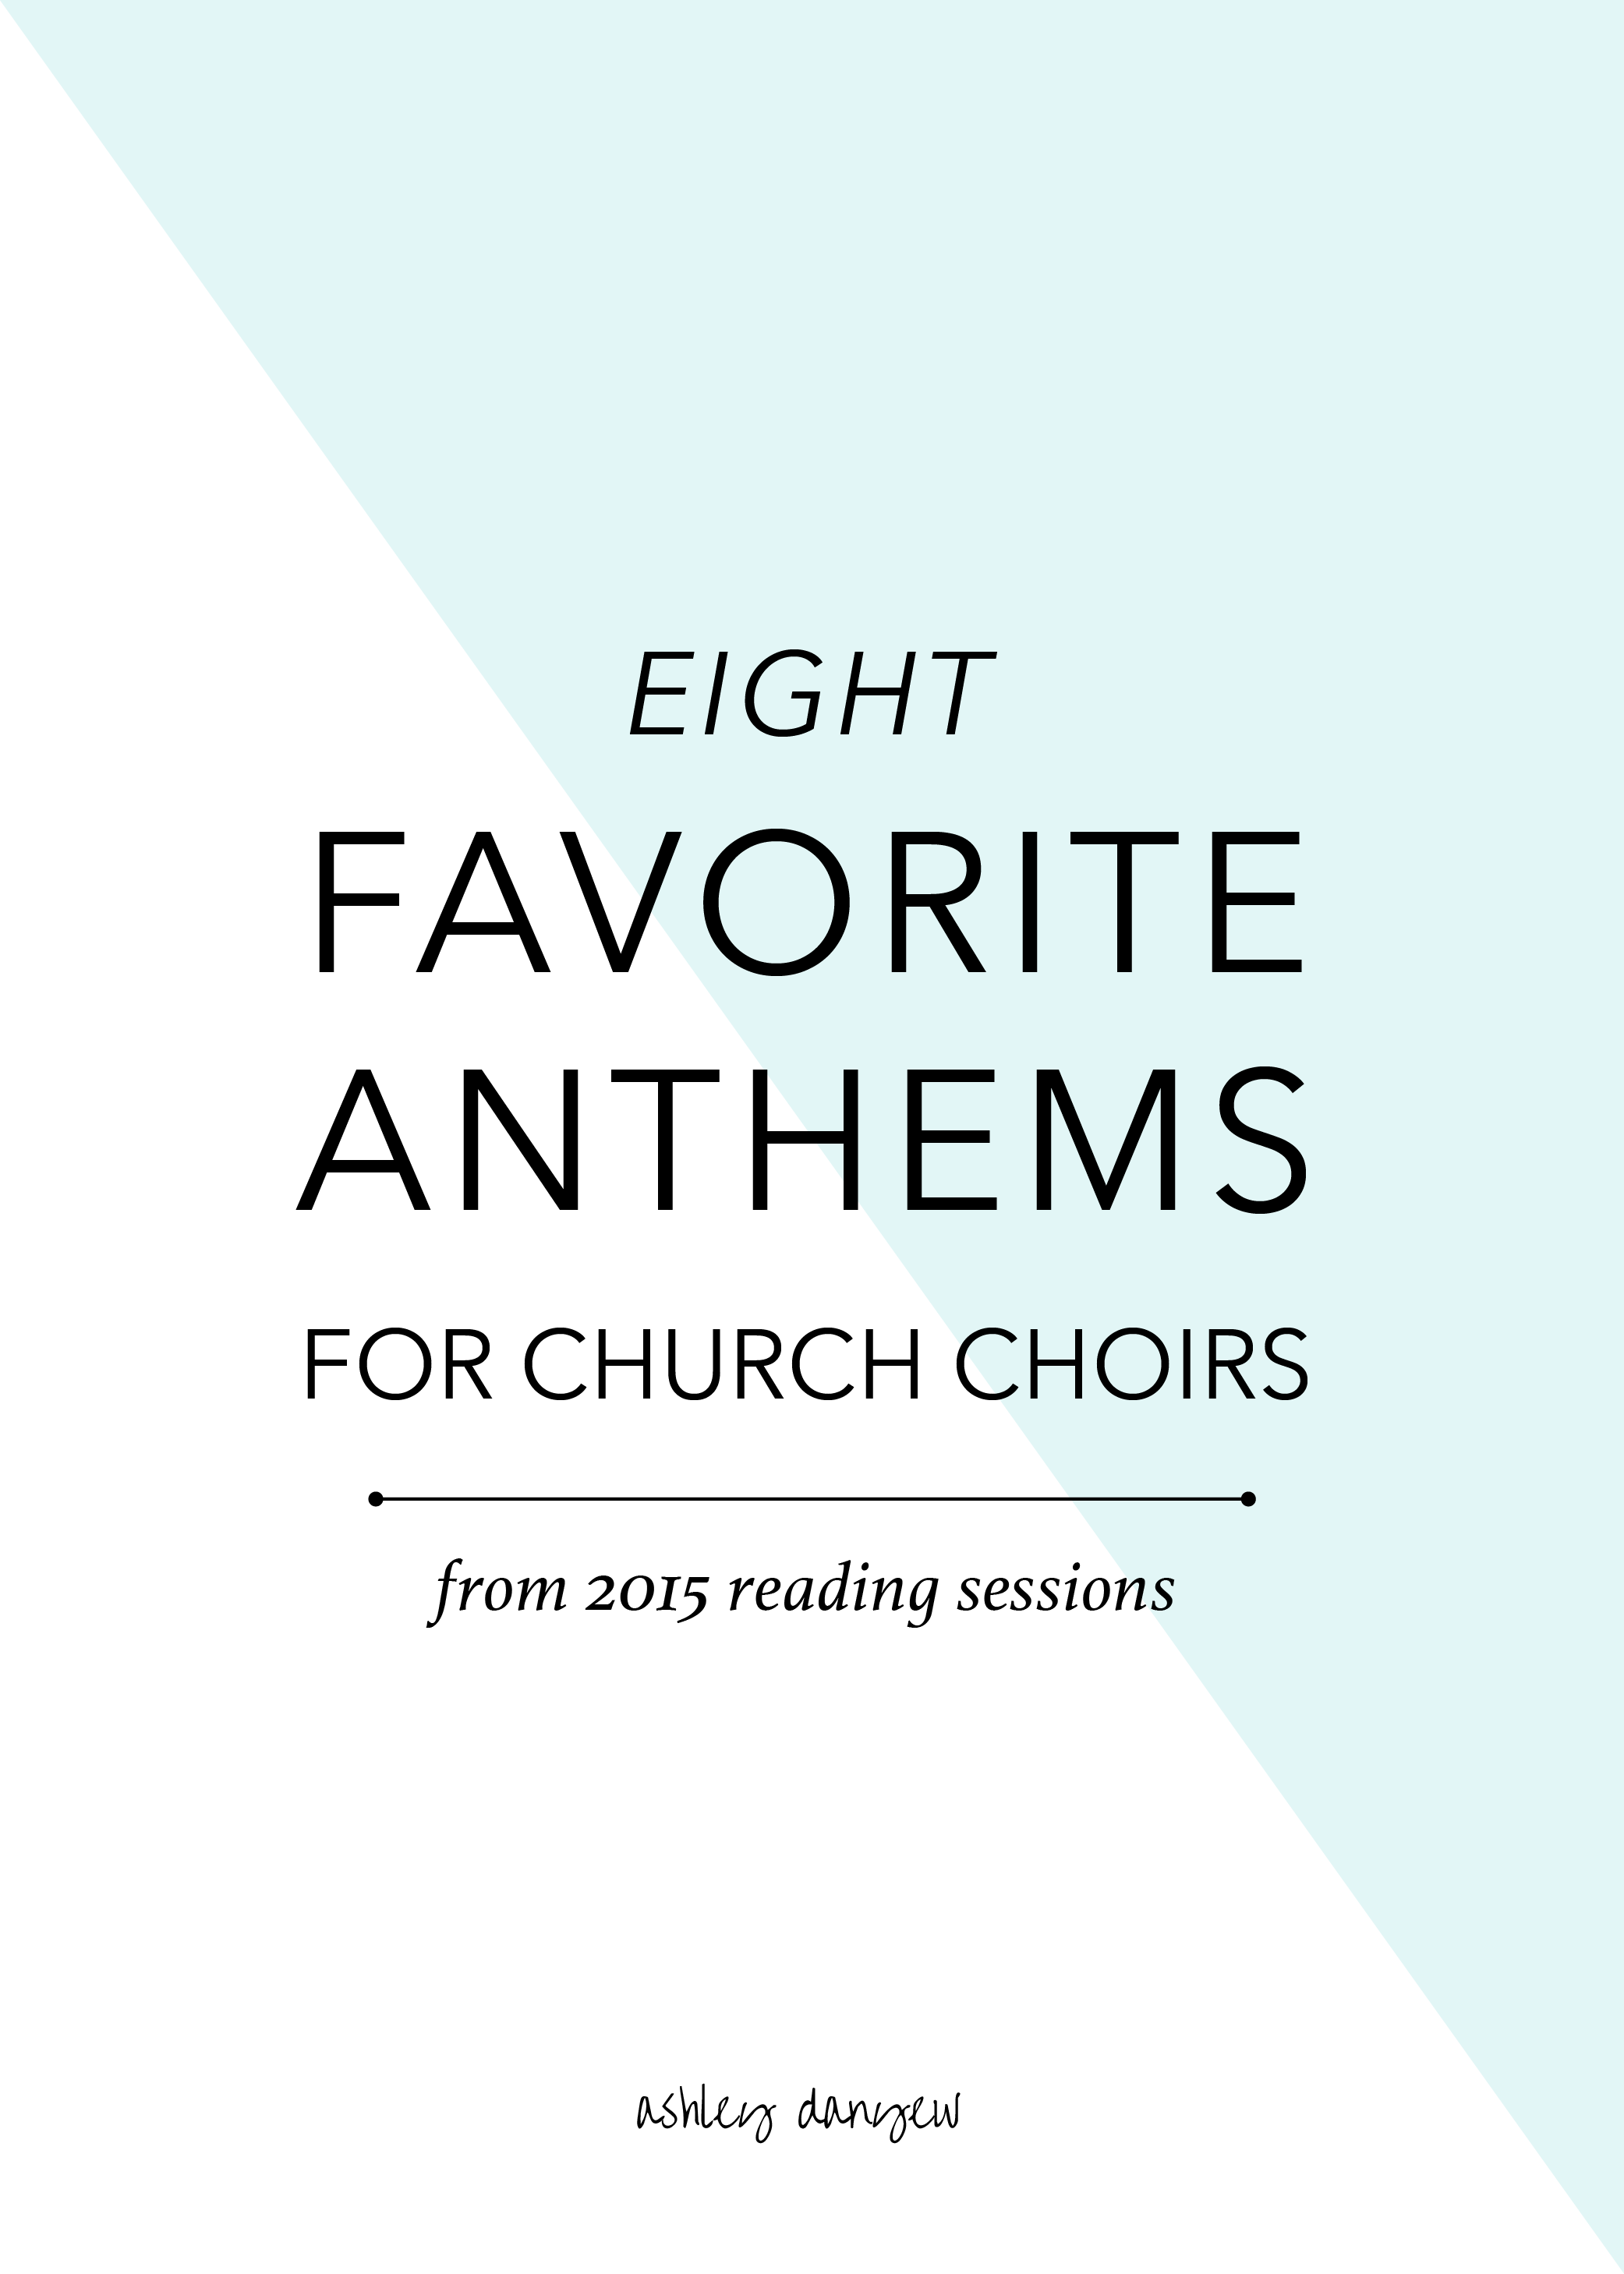 Eight Favorite Anthems for Church Choirs-01.png